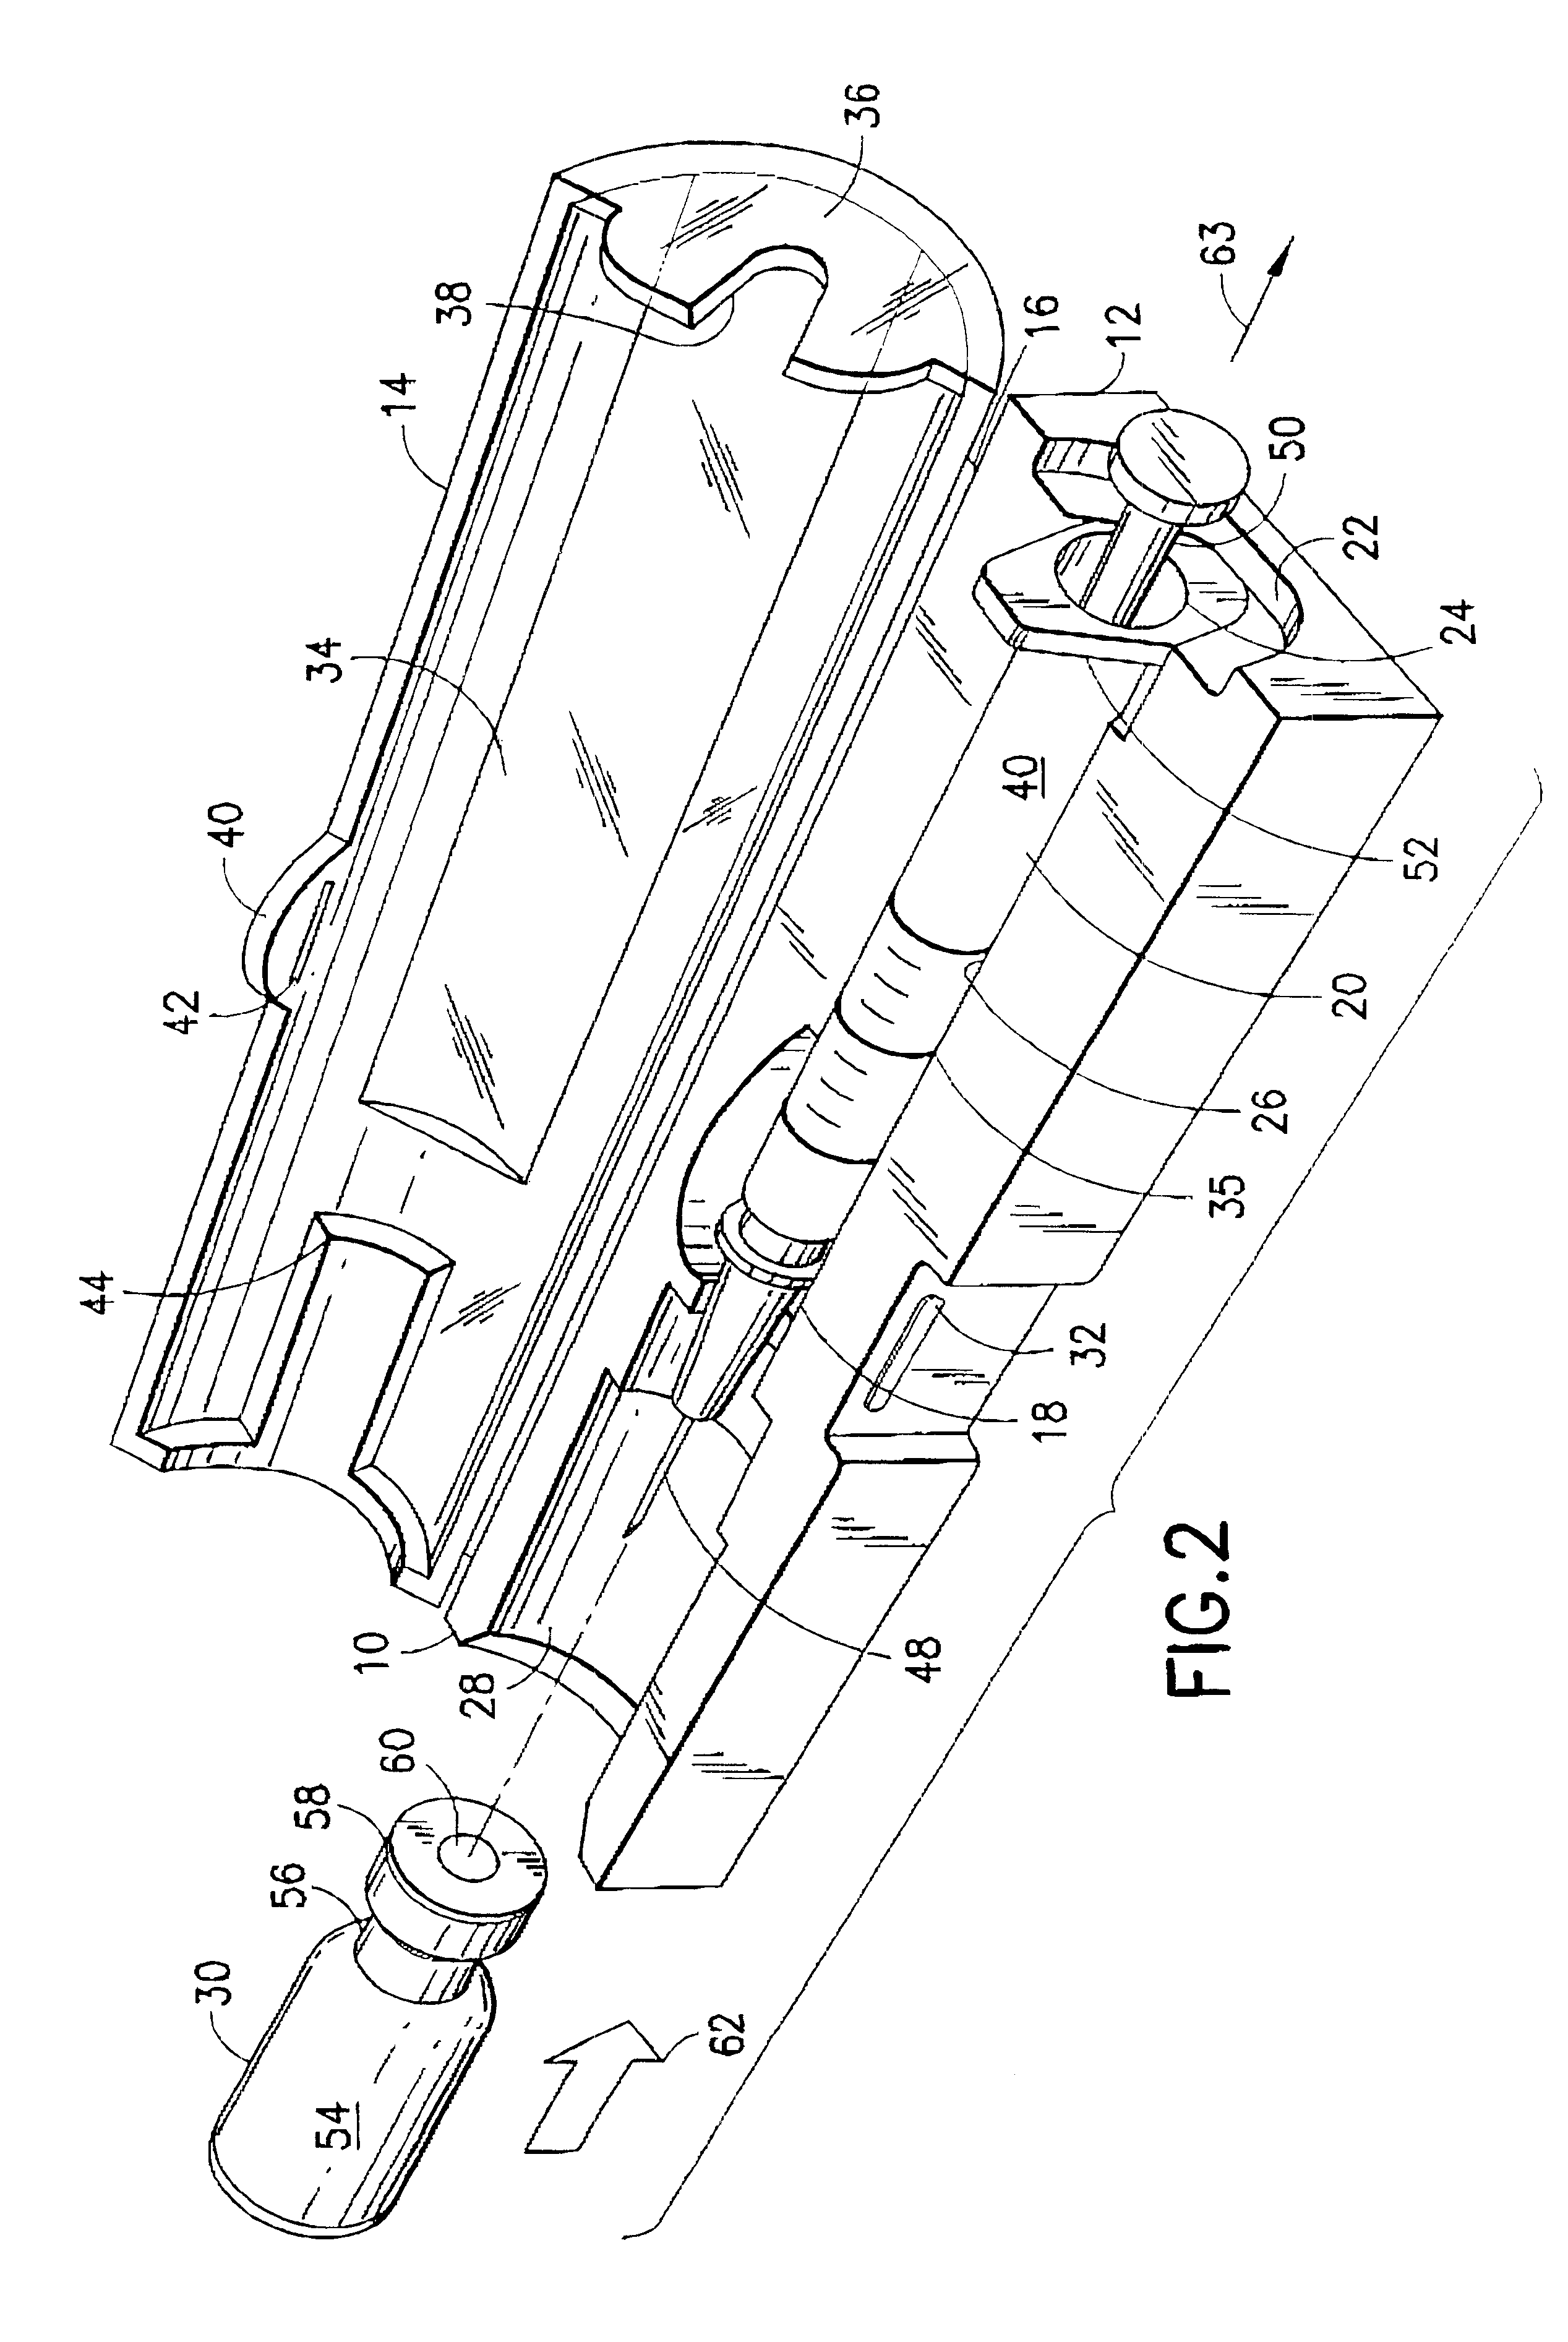 Kit for loading and disposal of hypodermic syringes used for administering medication